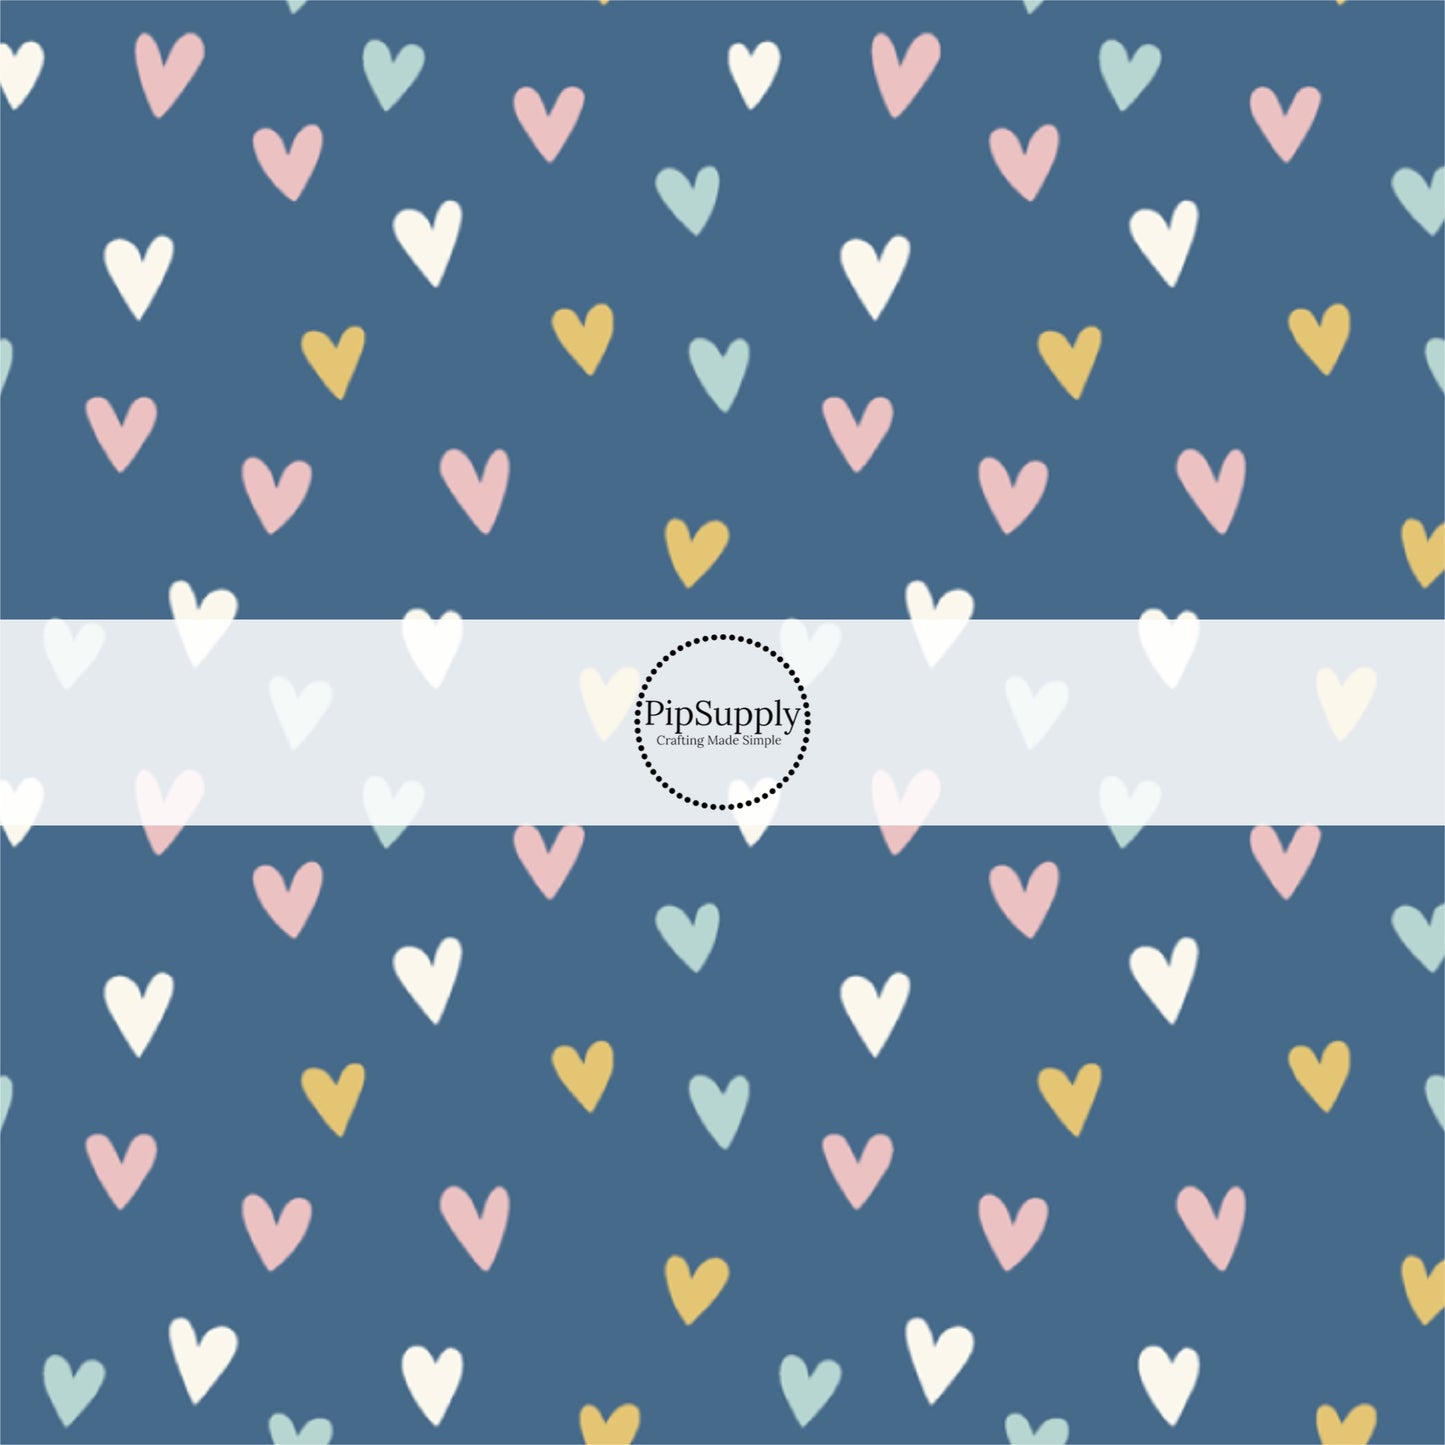 These spring patterned headband kits are easy to assemble and come with everything you need to make your own knotted headband. These kits include a custom printed and sewn fabric strip and a coordinating velvet headband. This cute pattern features light pink, light blue, yellow, and cream hearts on dark blue. 